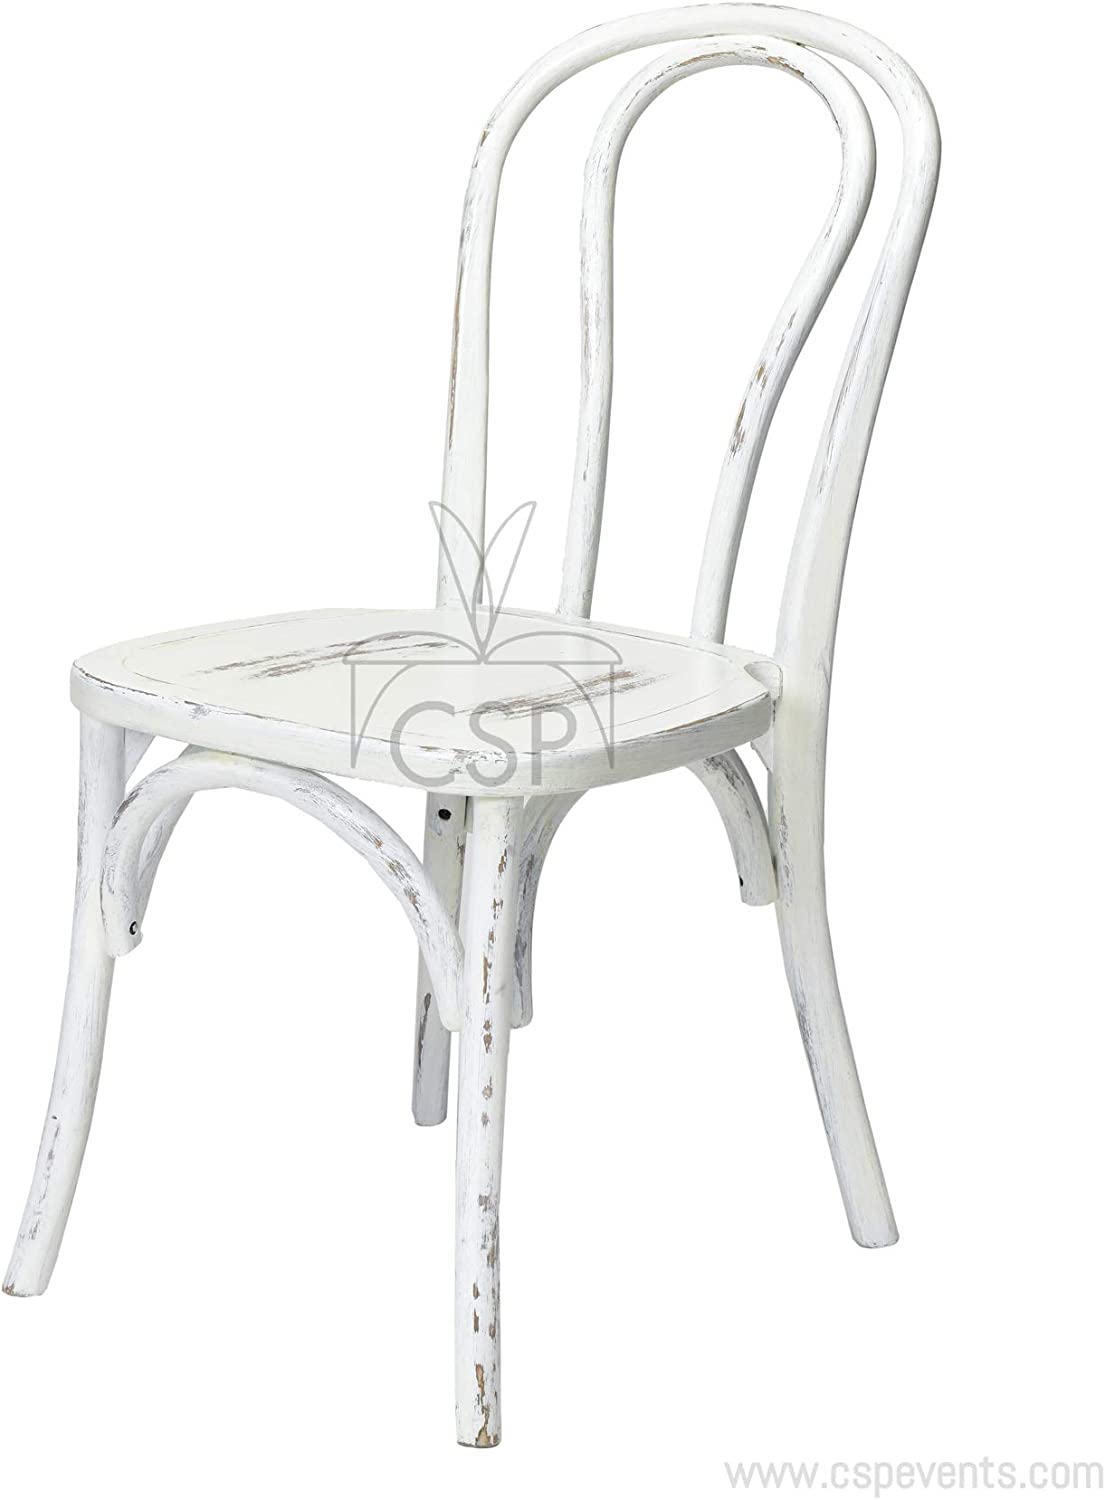 Commercial Seating Products Bentwood White Wash Chairs